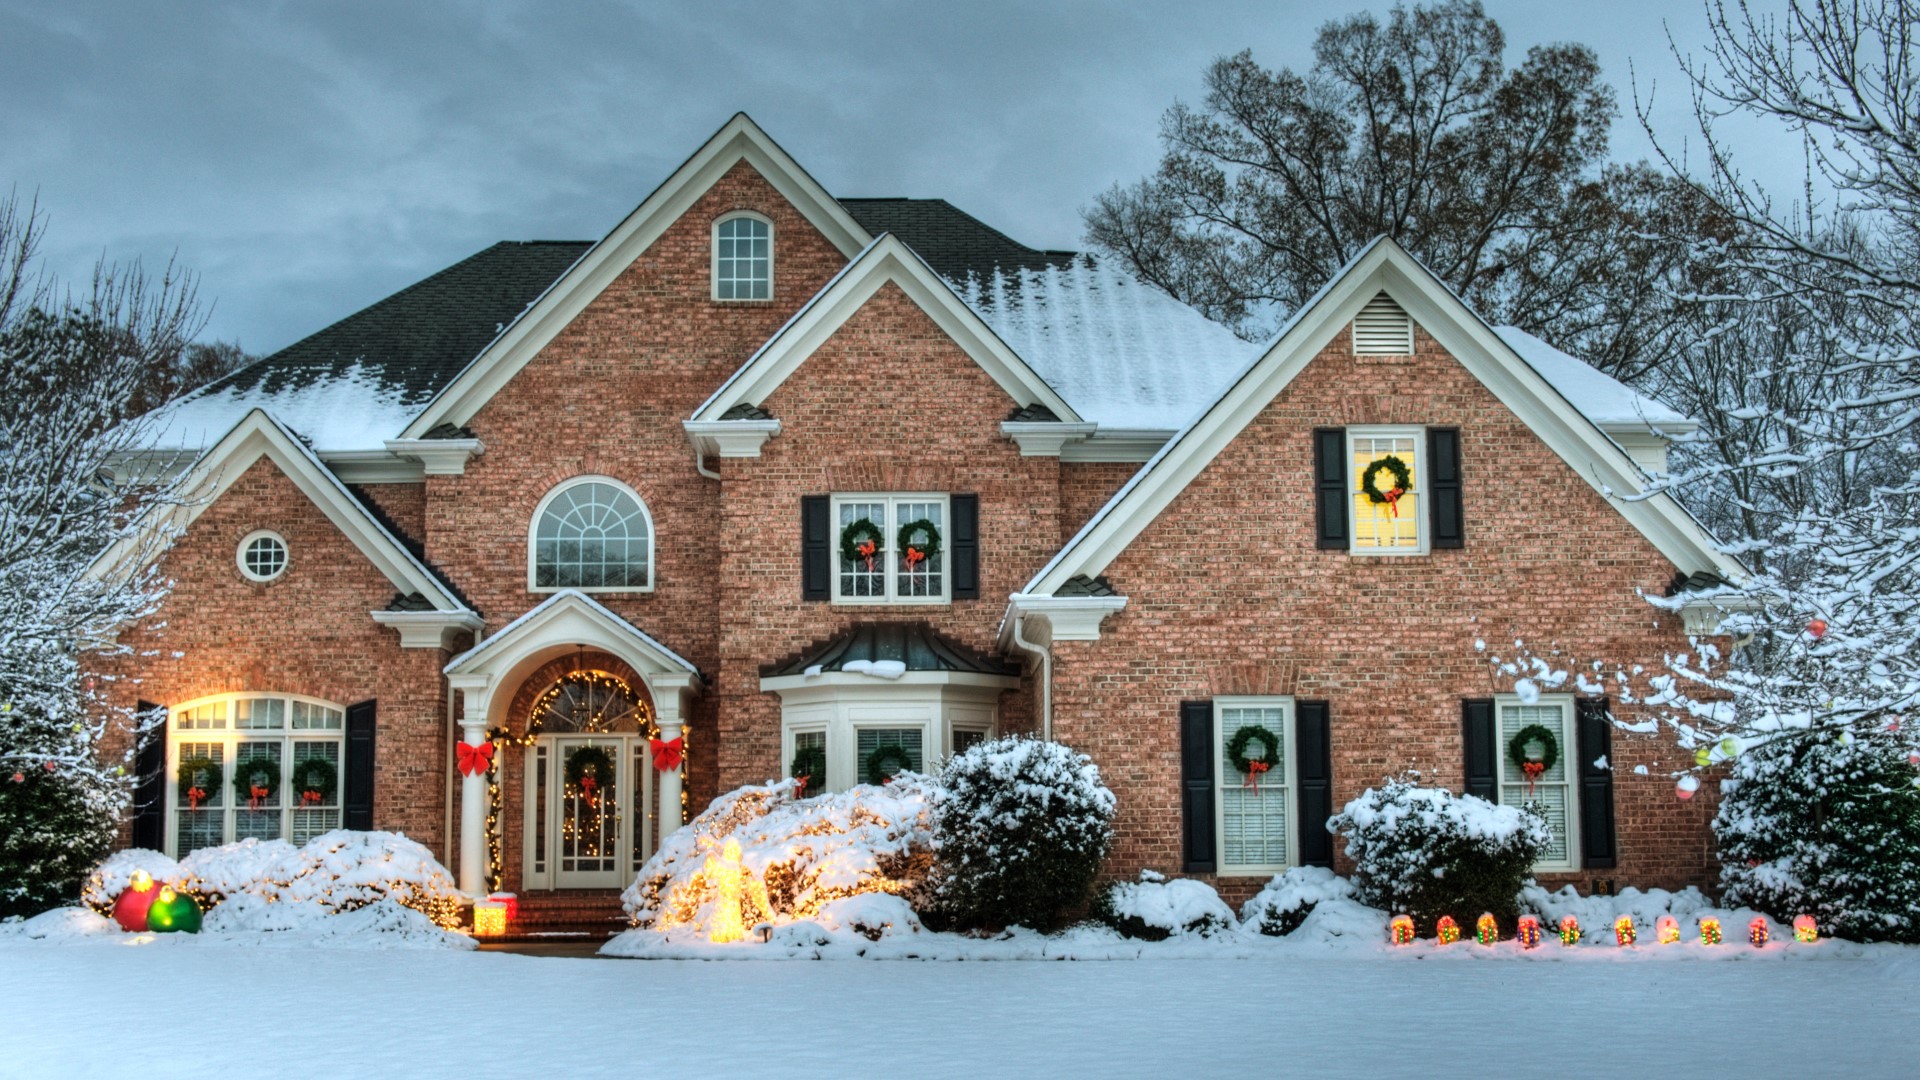 Making sure your home is ready for the holidays | wusa9.com